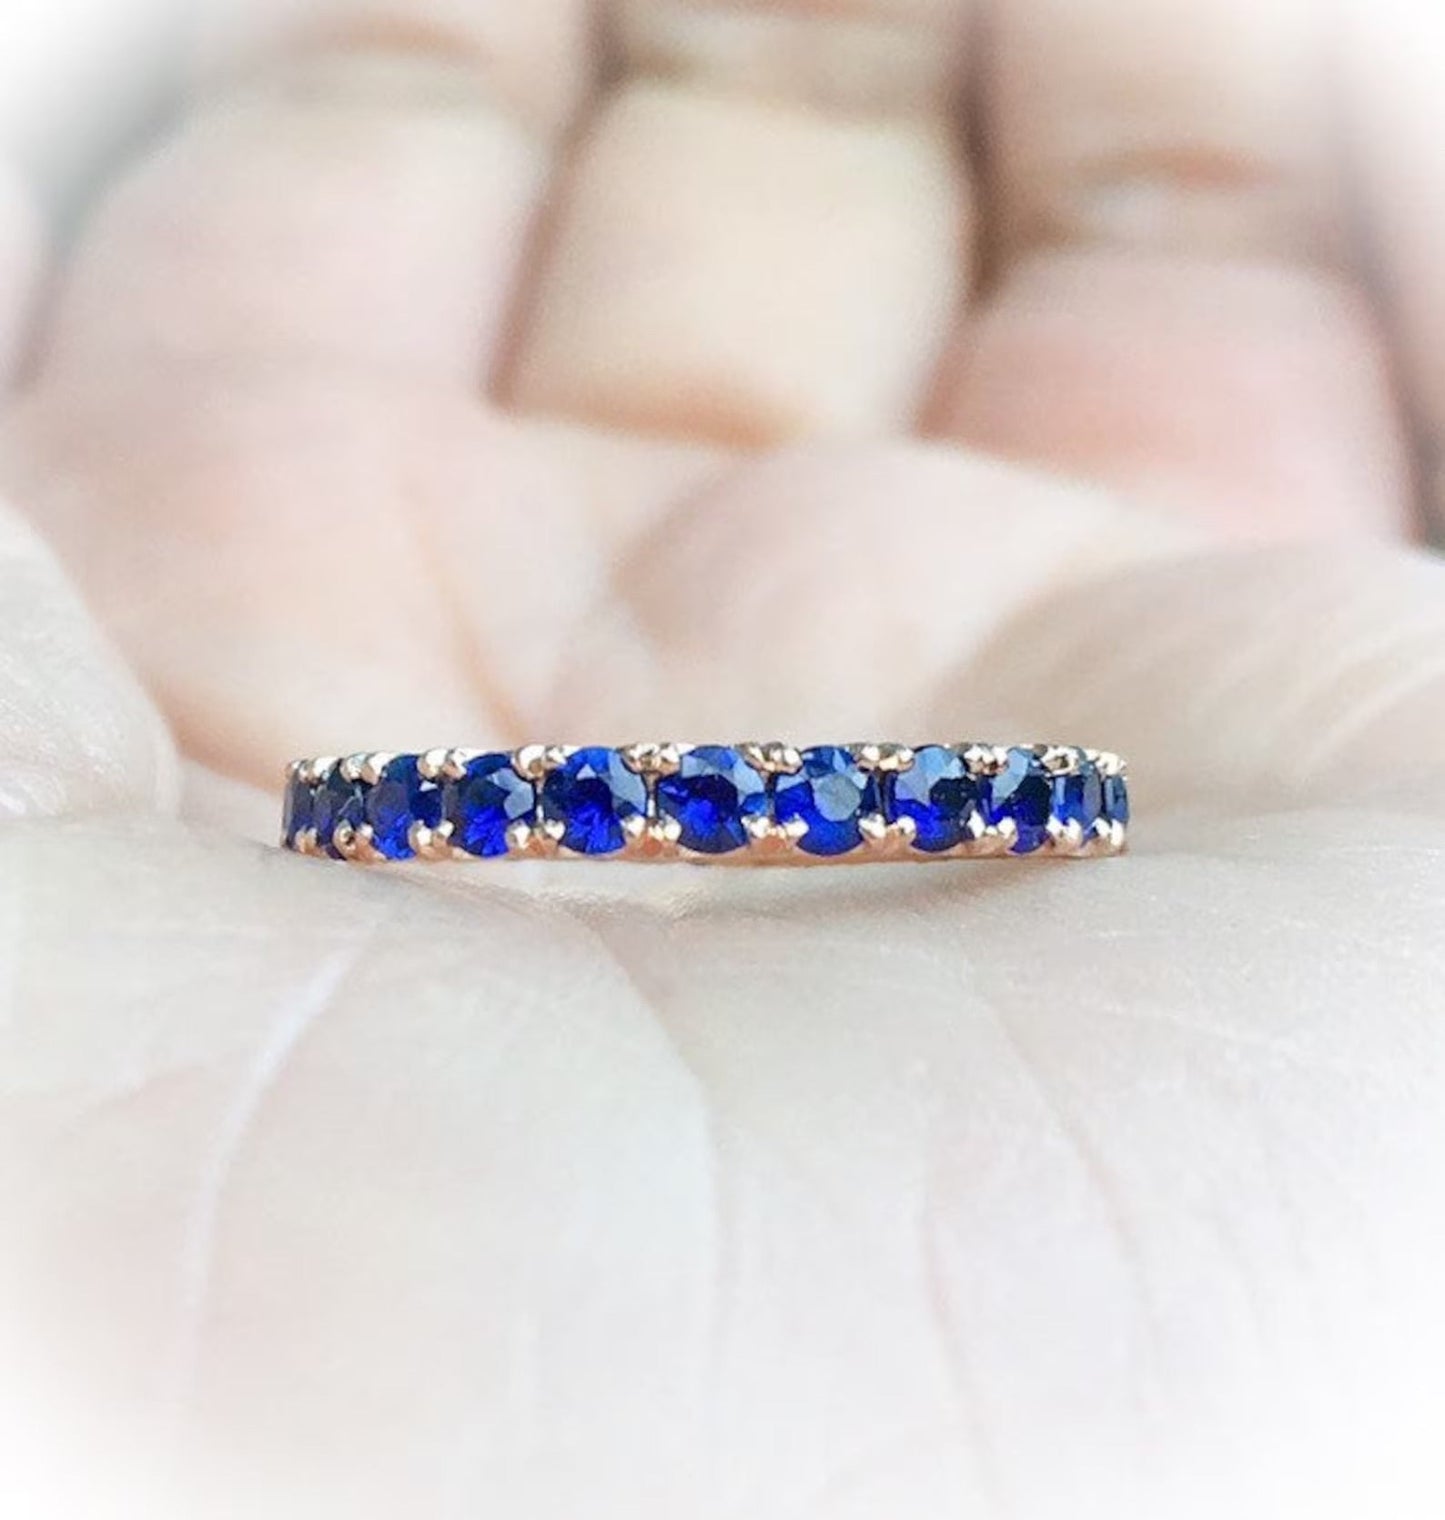 Blue Sapphire Band Full Eternity Pave Blue Sapphire Ring 2.3mm Blue Sapphire Wedding Guard Band Pave Blue Sapphire September Stacking Ring